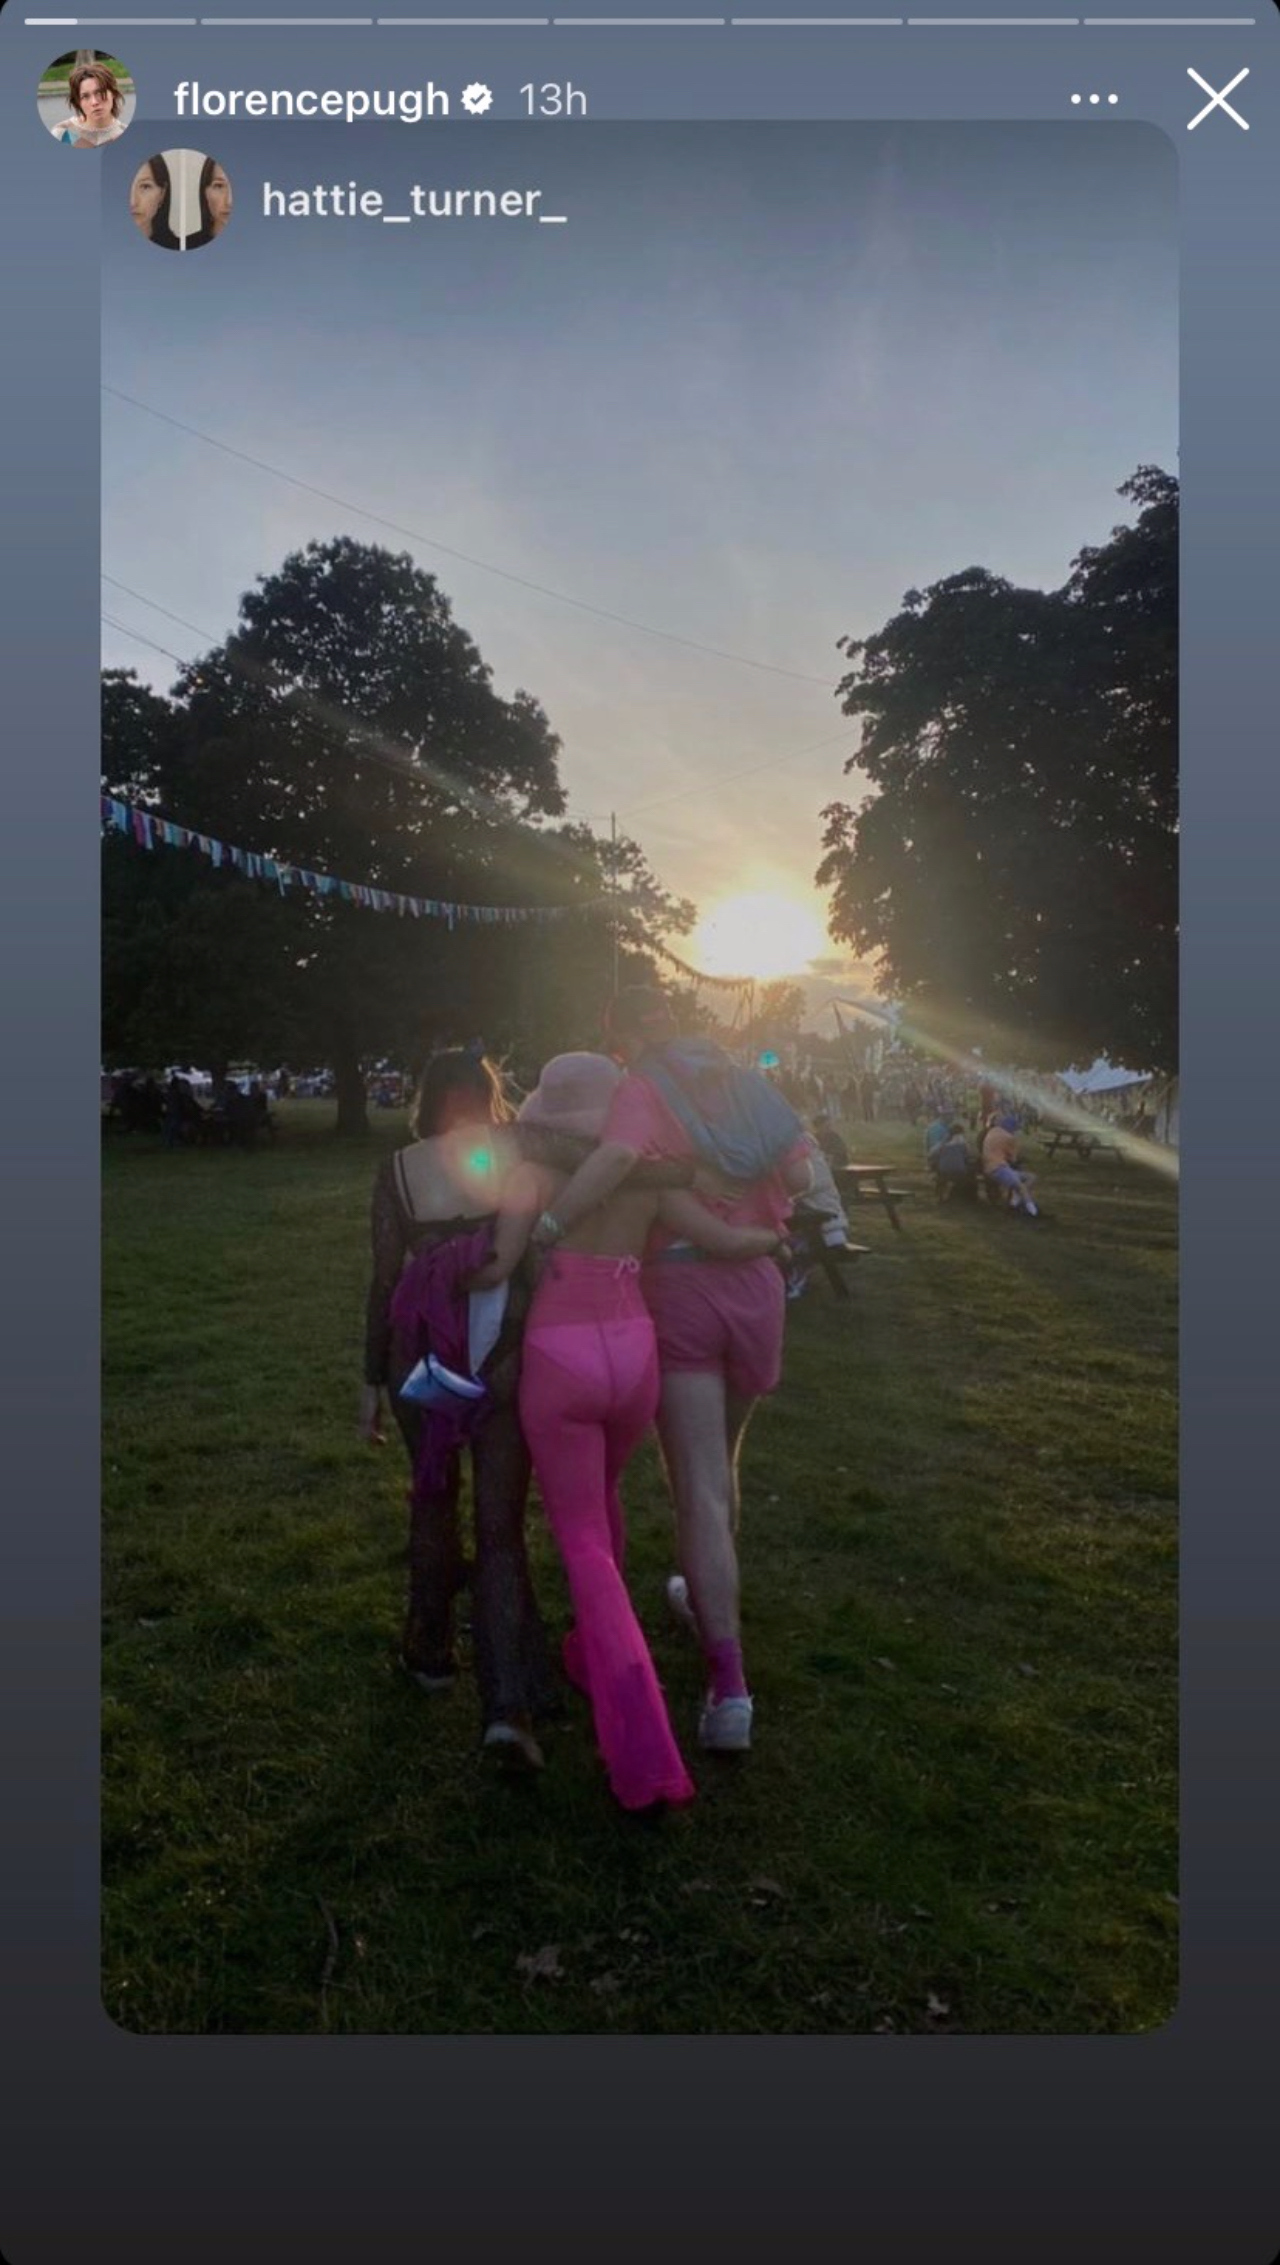 Florence Pugh wearing Barbie pink at a Music festival photographed from behind with friends.